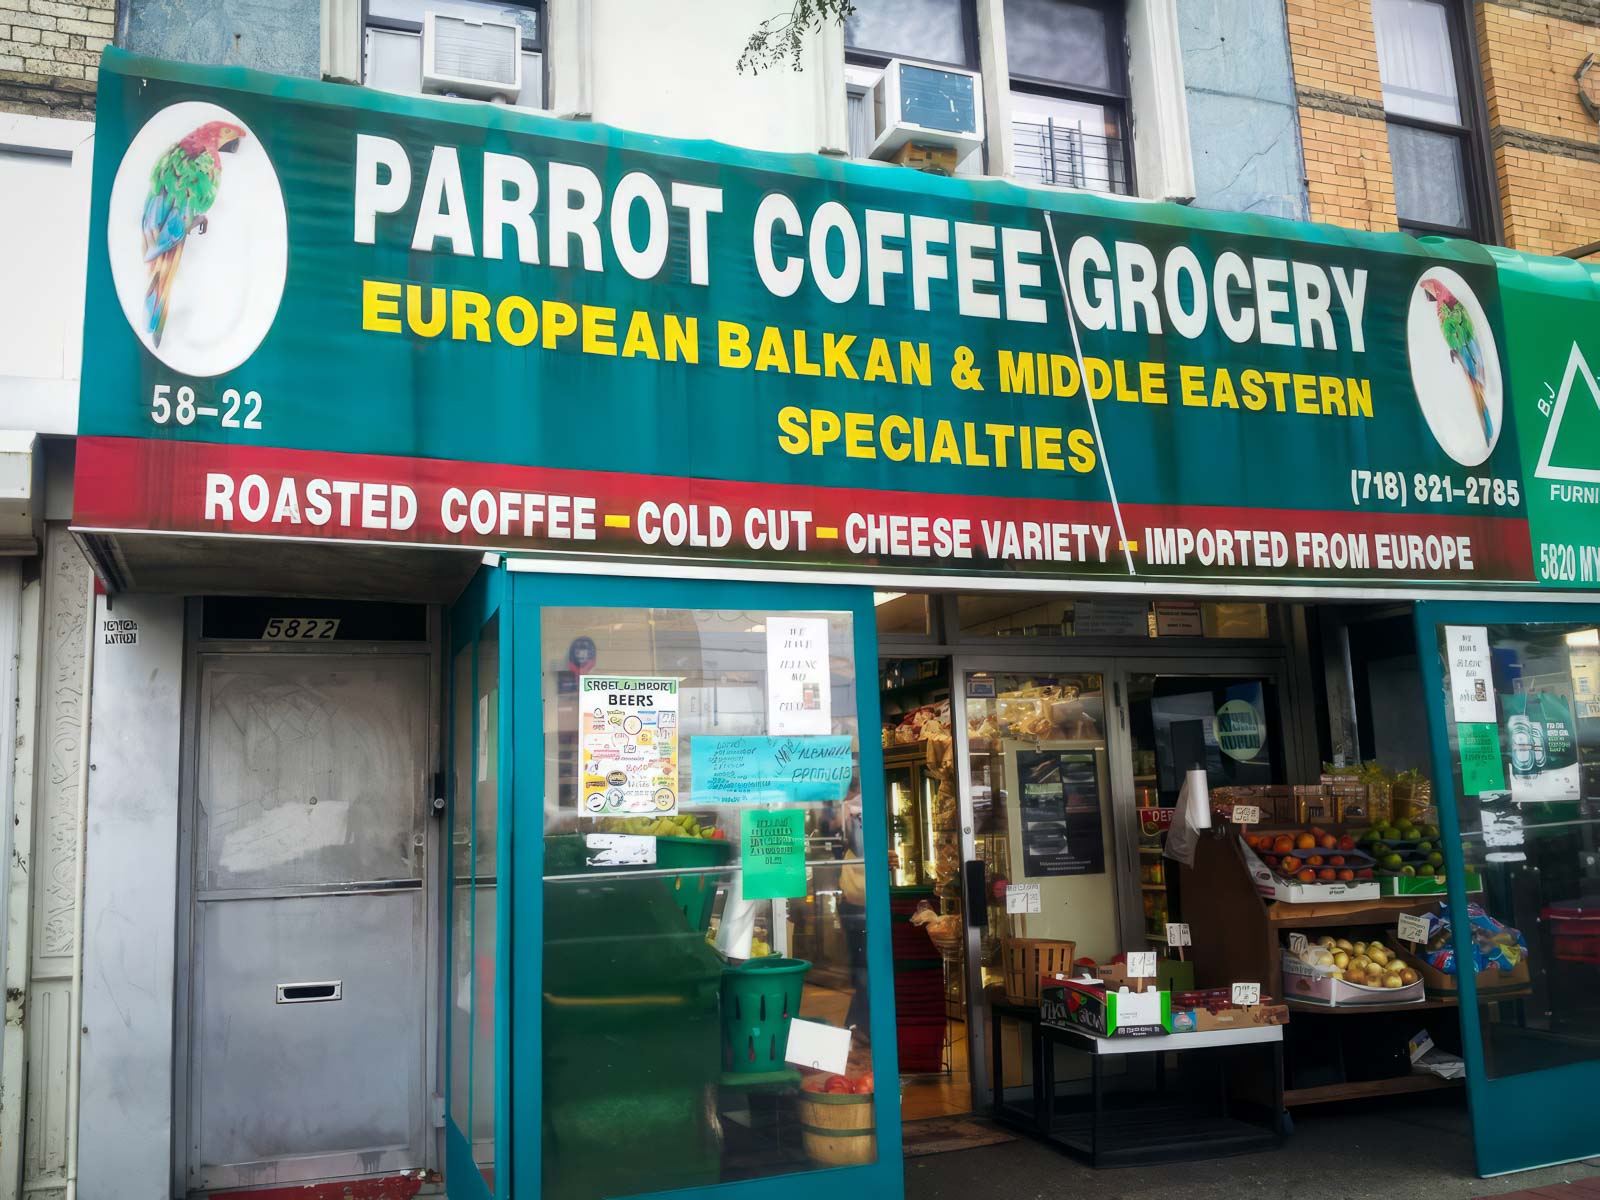 Parrot Coffee Grocery storefront with a green awning featuring the store's name, logo, and services such as European Balkan and Middle Eastern specialties, roasted coffee, cold cuts, and a variety of cheeses imported from Europe.